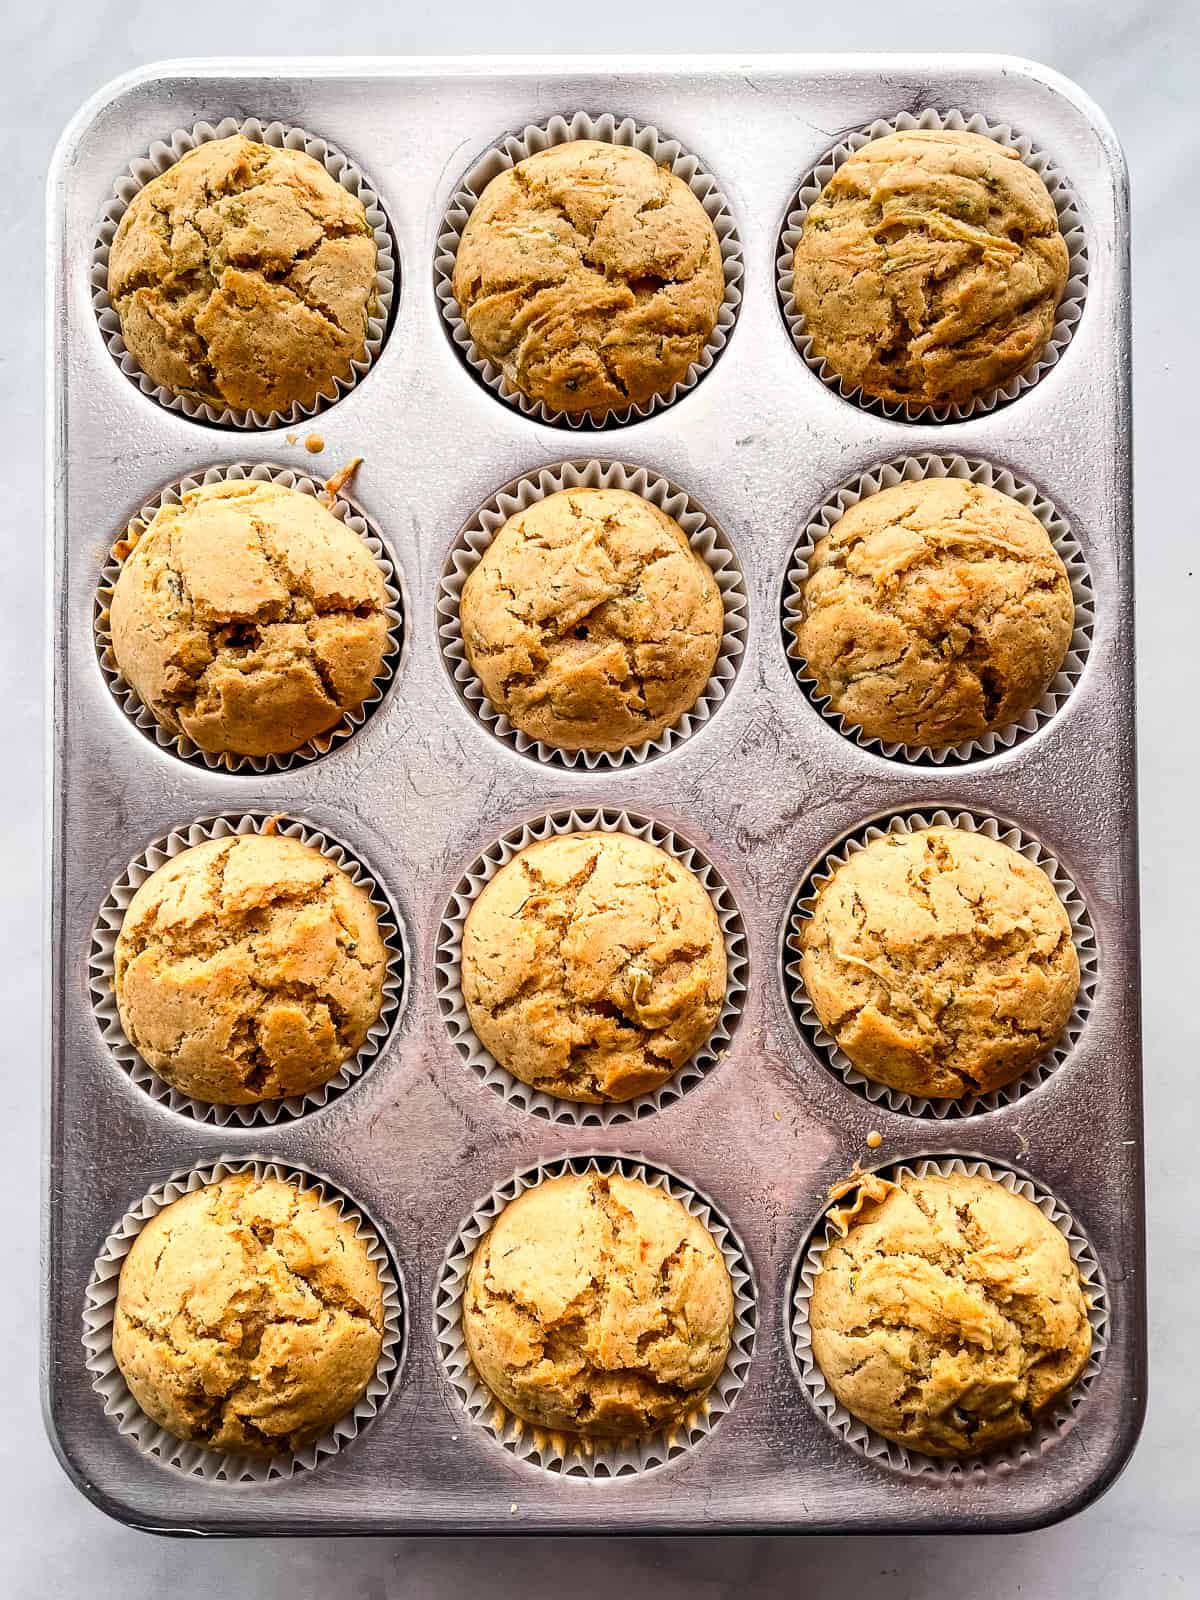 Baked zucchini muffins in pan.